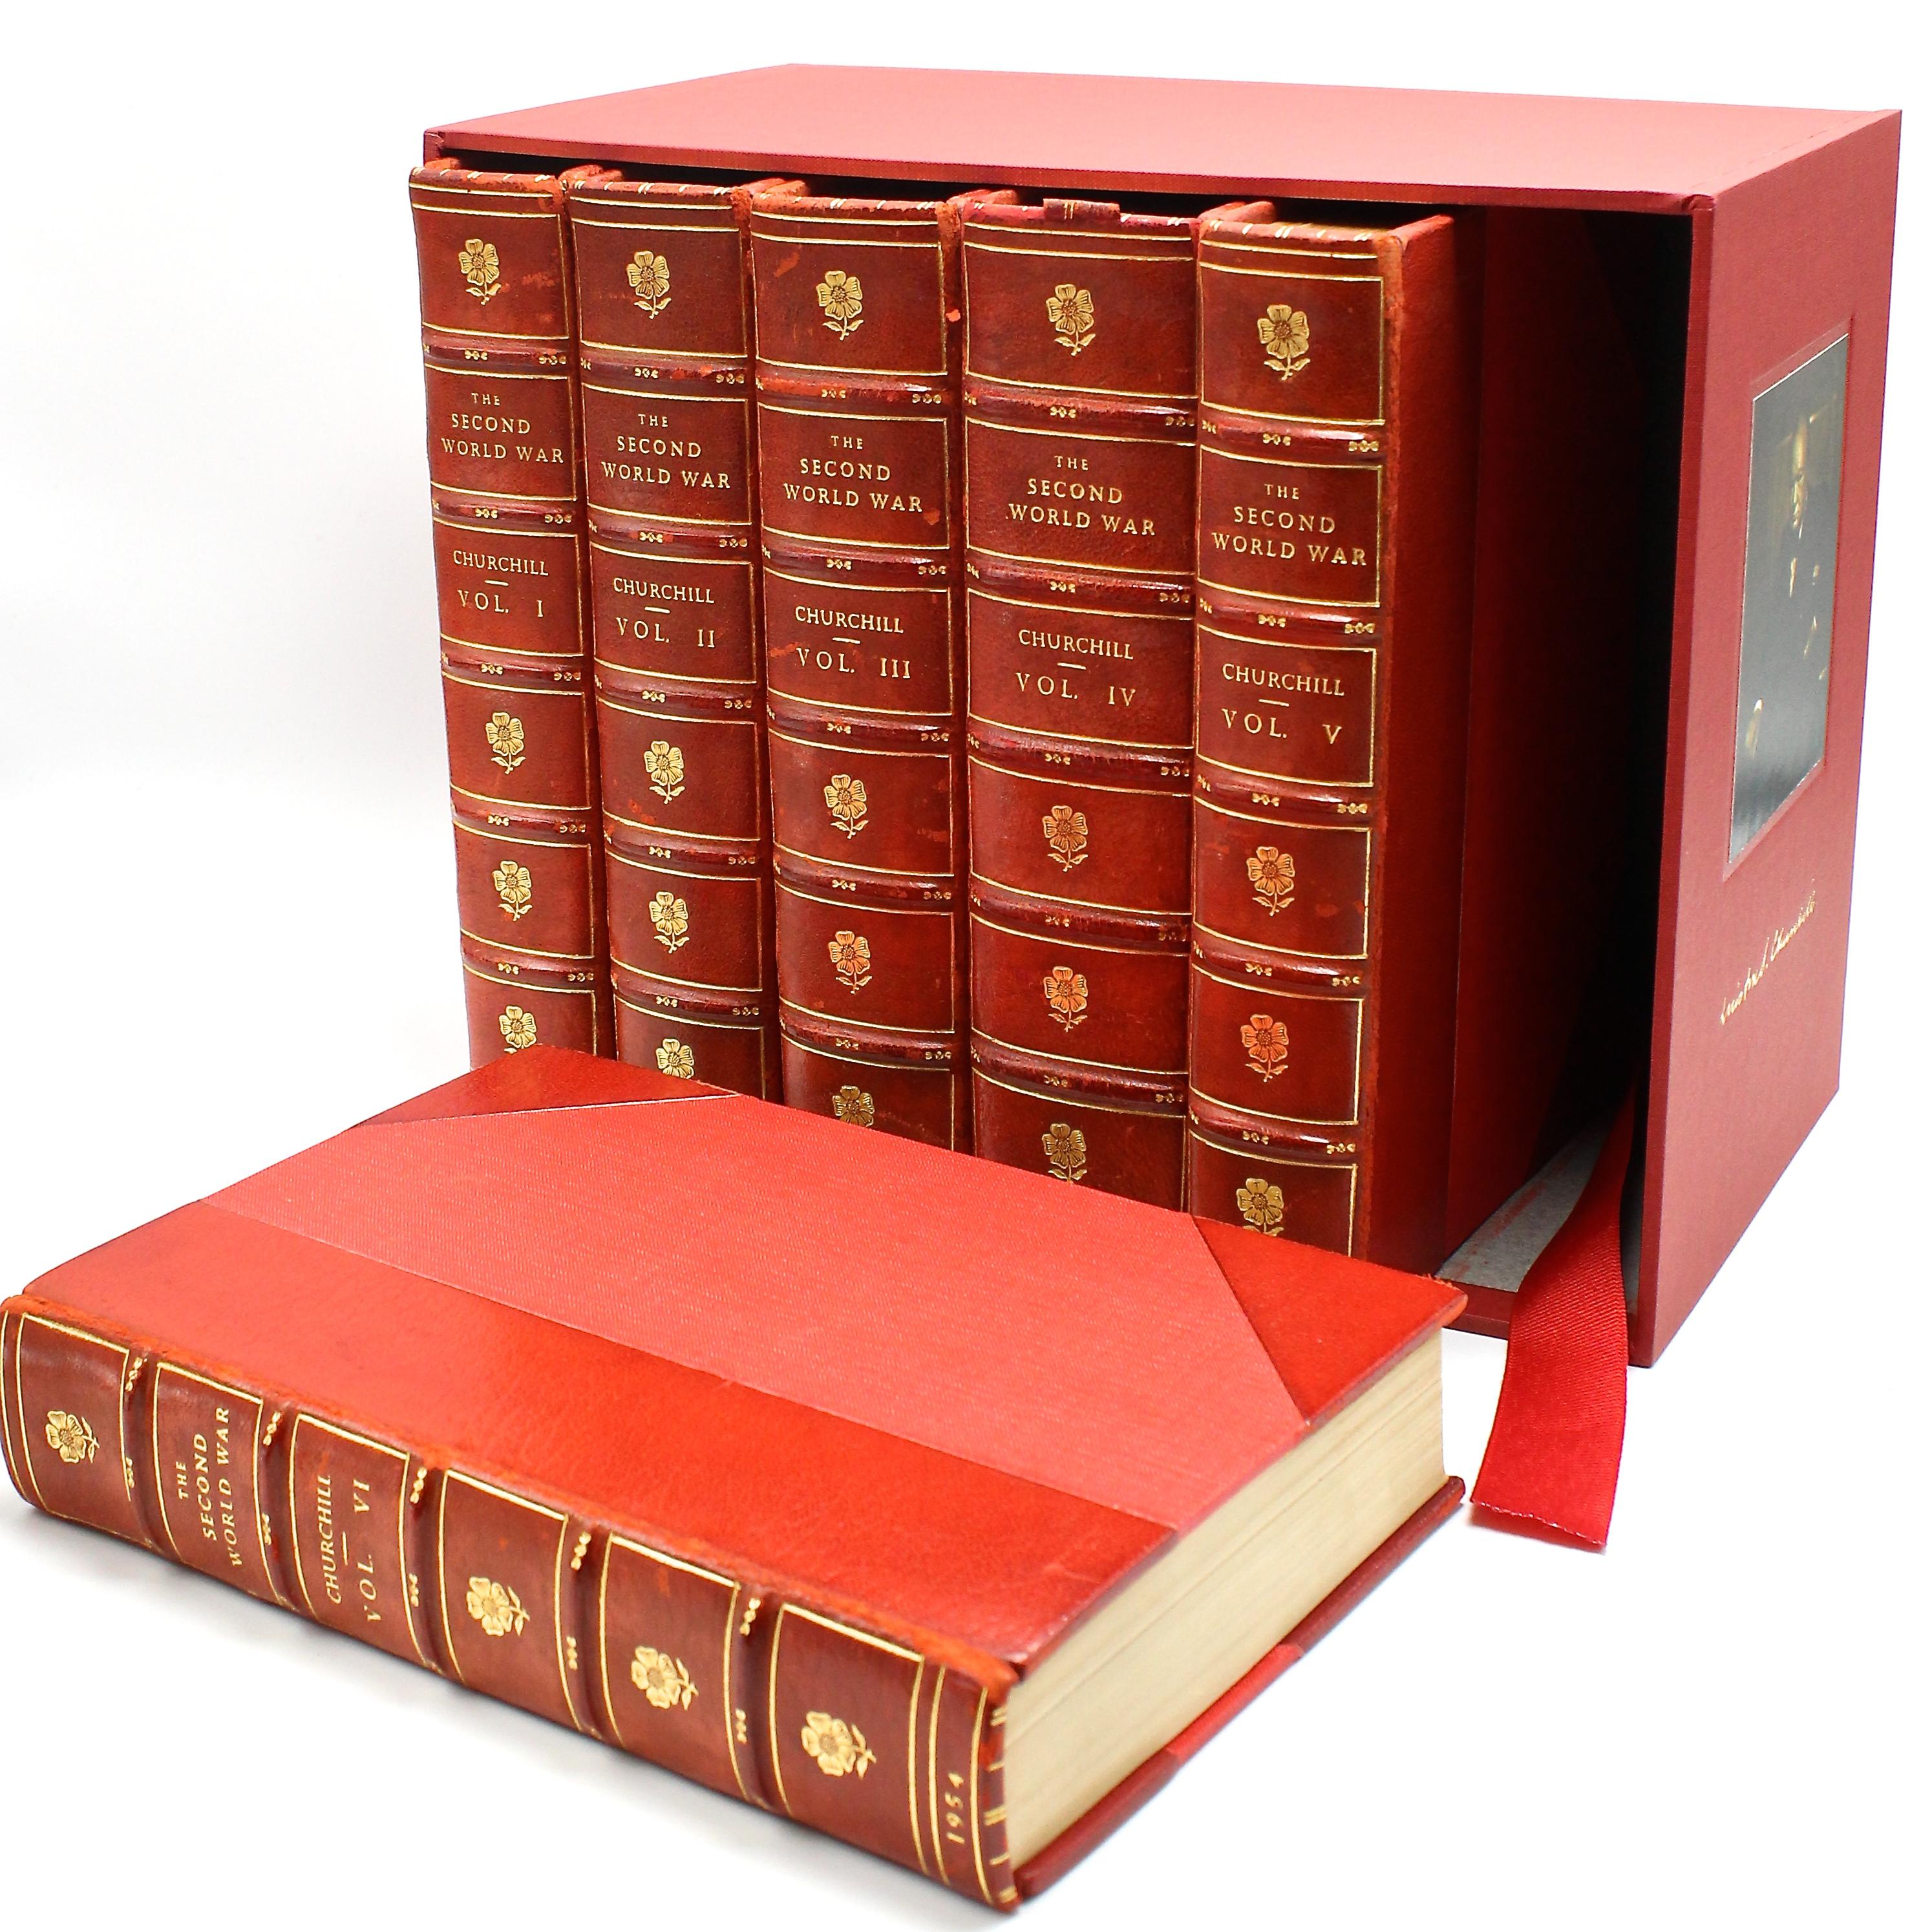 Churchill, Winston S. The Second World War. London: Cassell & Company Ltd., 1948-1954. First English edition signed by Churchill in Volume IV. Period binding and presented in a custom archival slipcase.

This six volume set of The Second World War